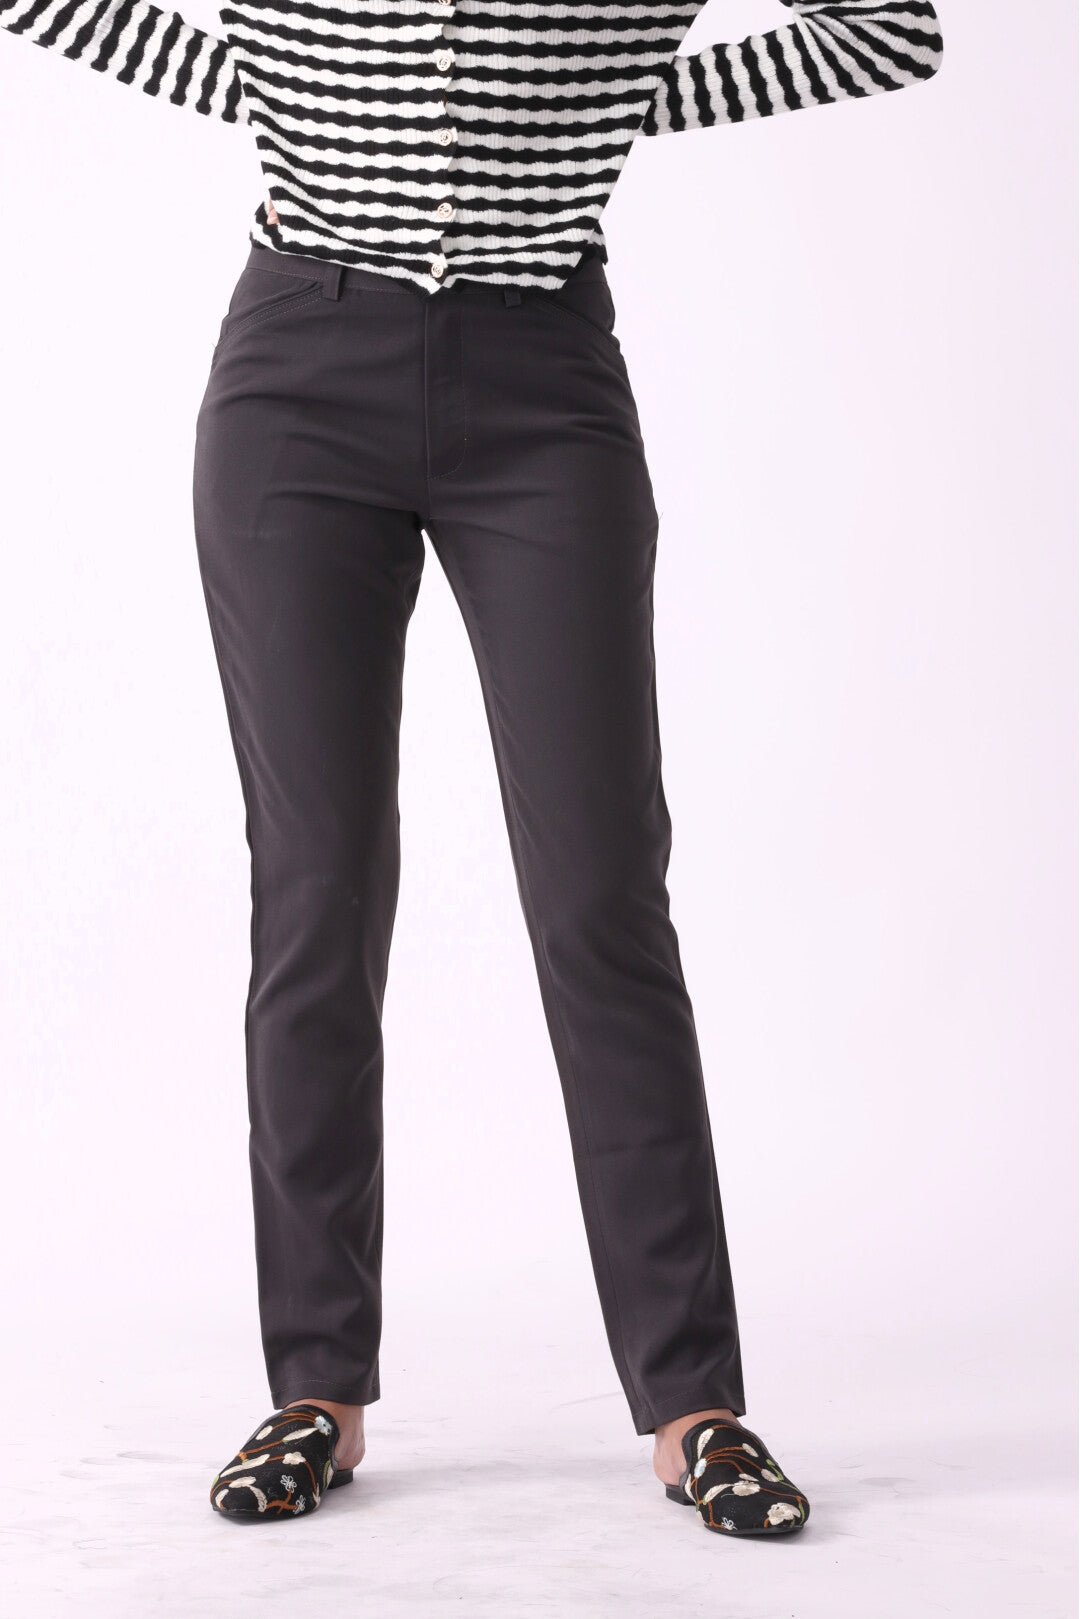 Solid Buttoned Carrot Pants - Negative Apparel